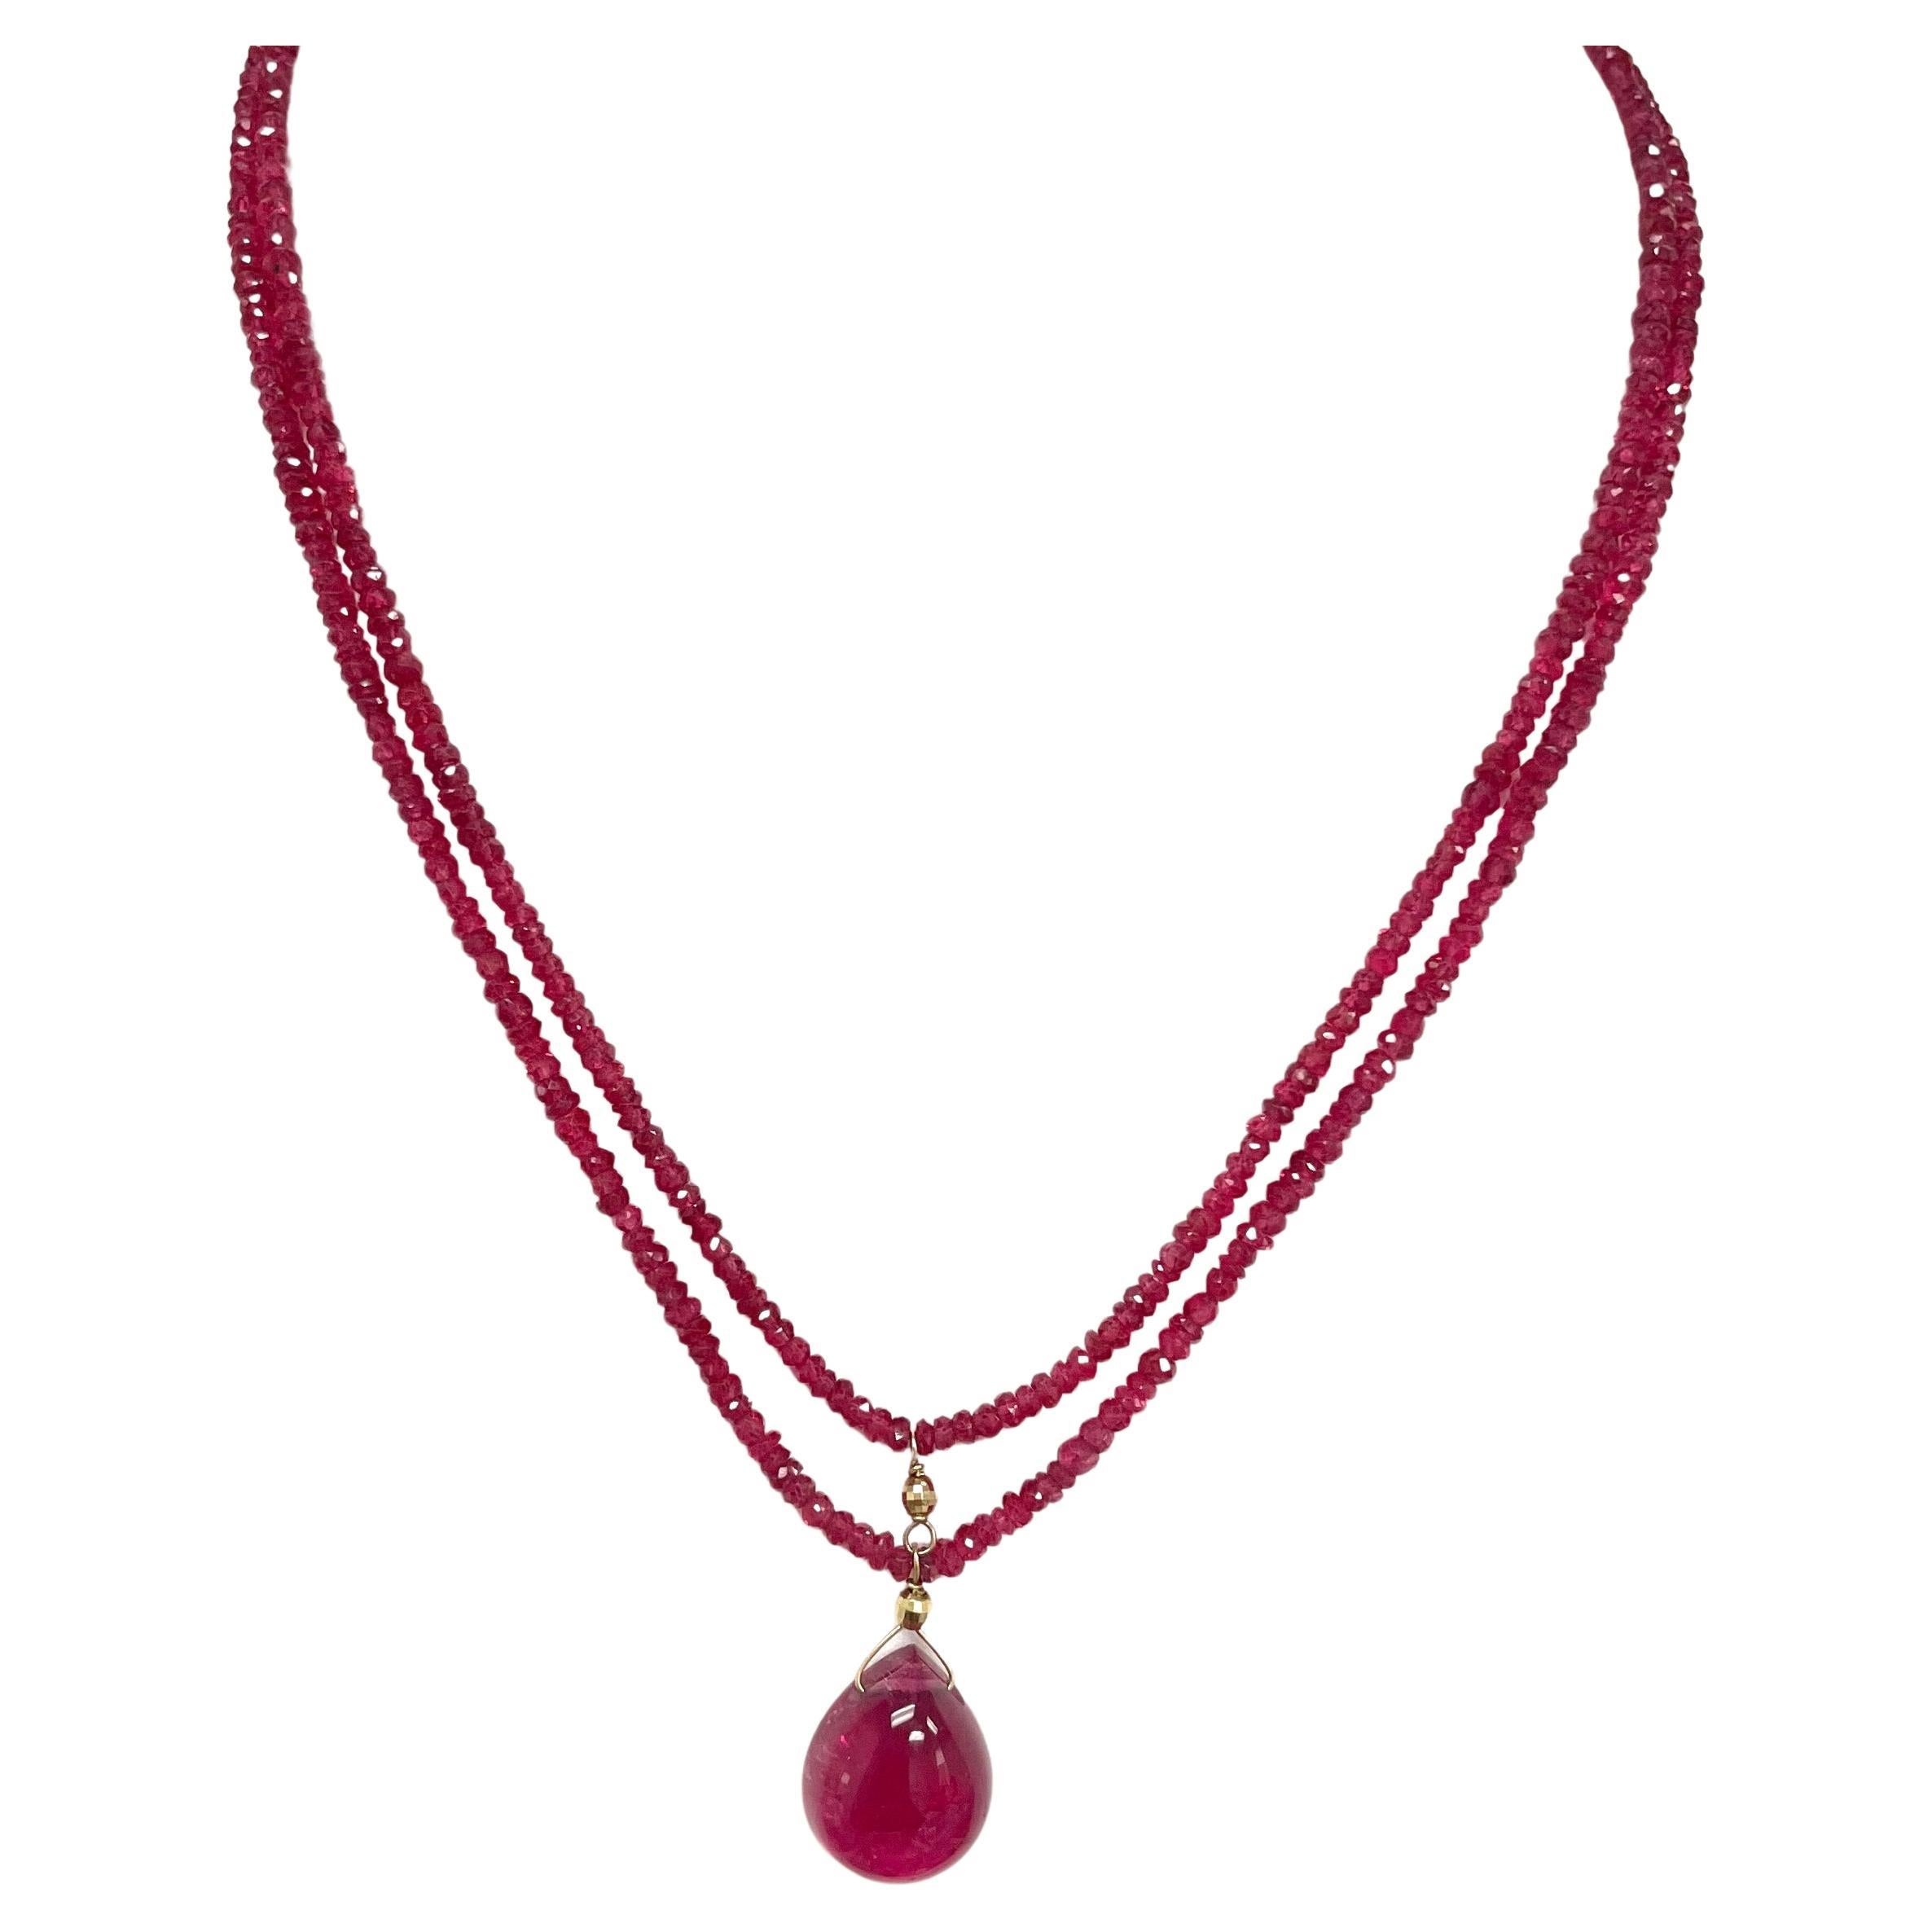 Hot Pink Spinel with Red Rubellite Tourmaline Pendant Double Strand Necklace